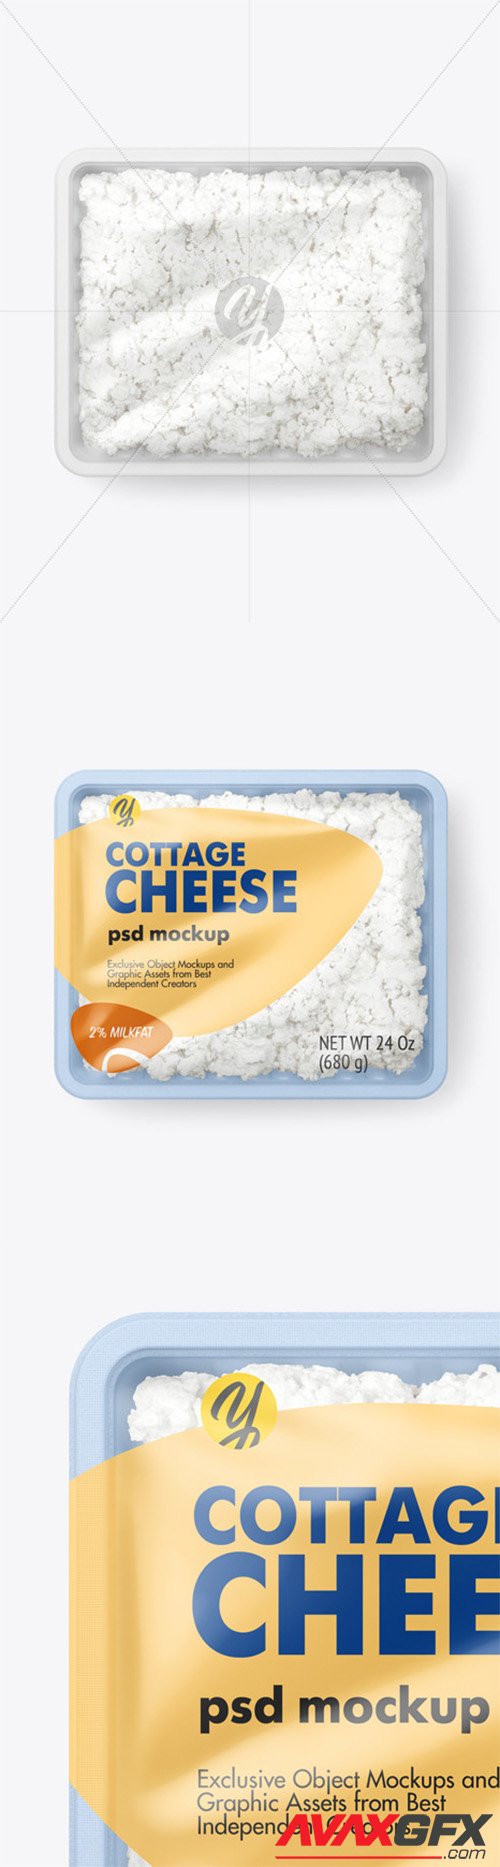 Plastic Tray With Cottage Cheese Mockup 66087